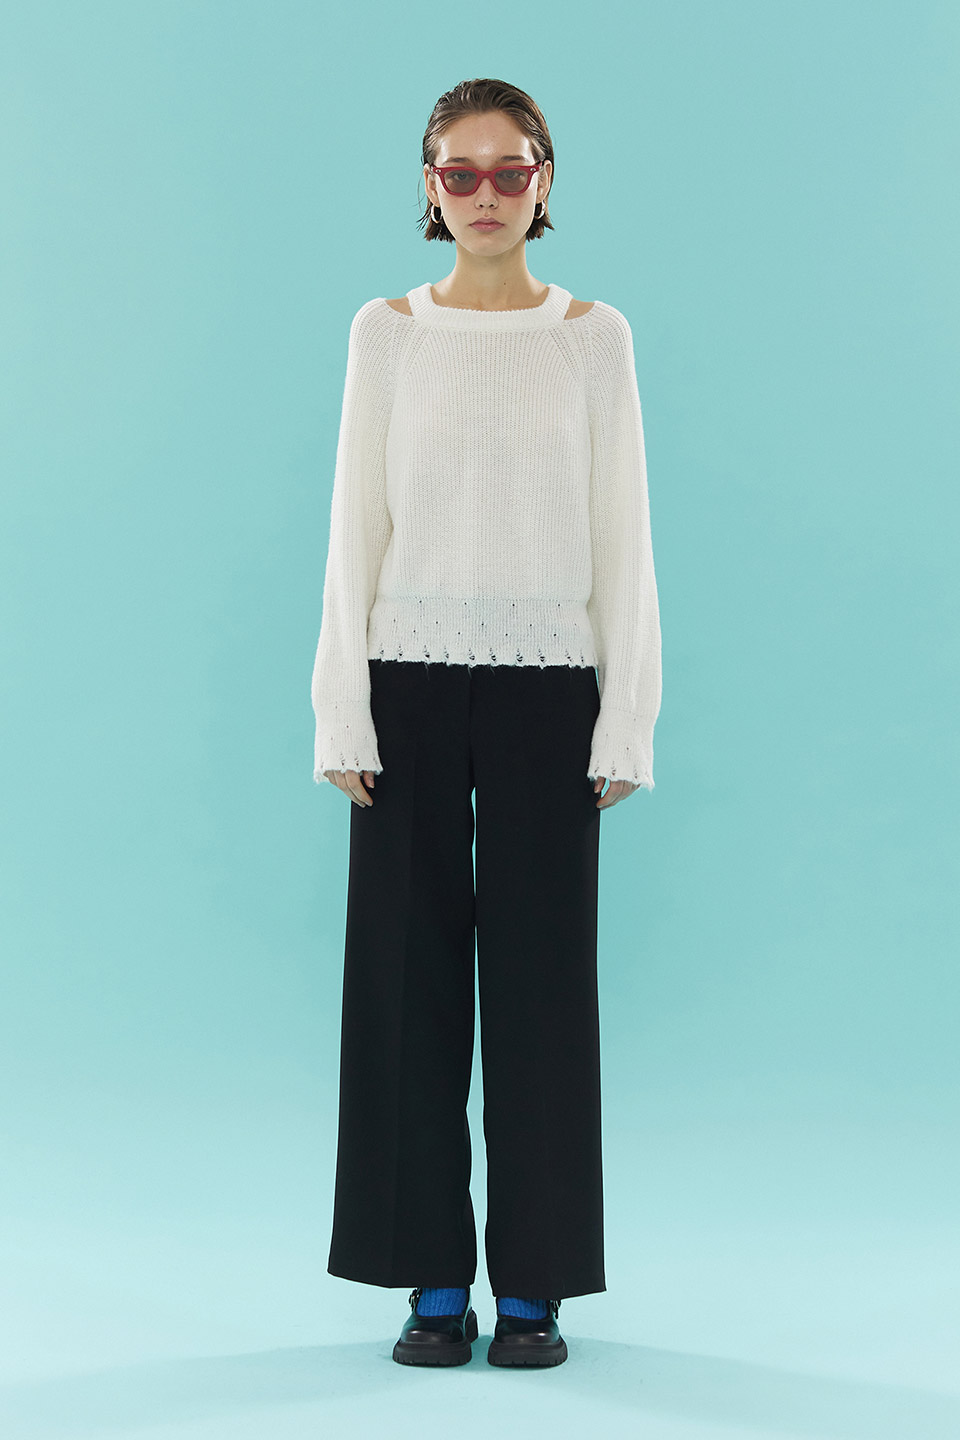 Loose Fit Cropped Knit_IVORY